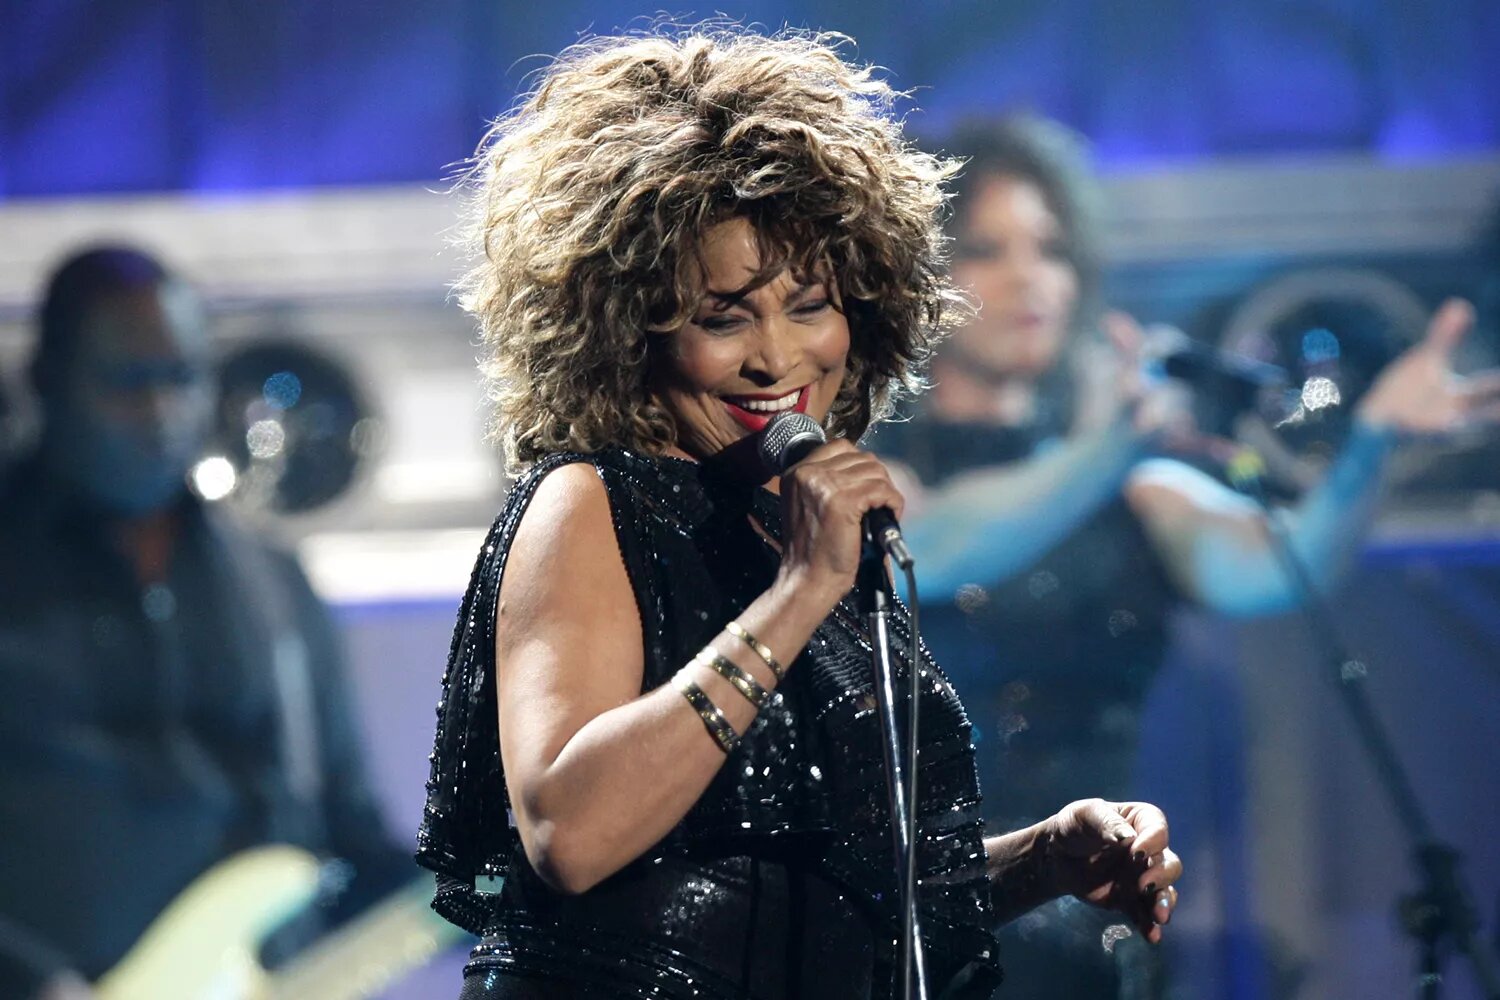 We Lost Another One. Queen of Rock 'n' Roll Tina Turner Dead at 83 After 'Long Illness': Rep